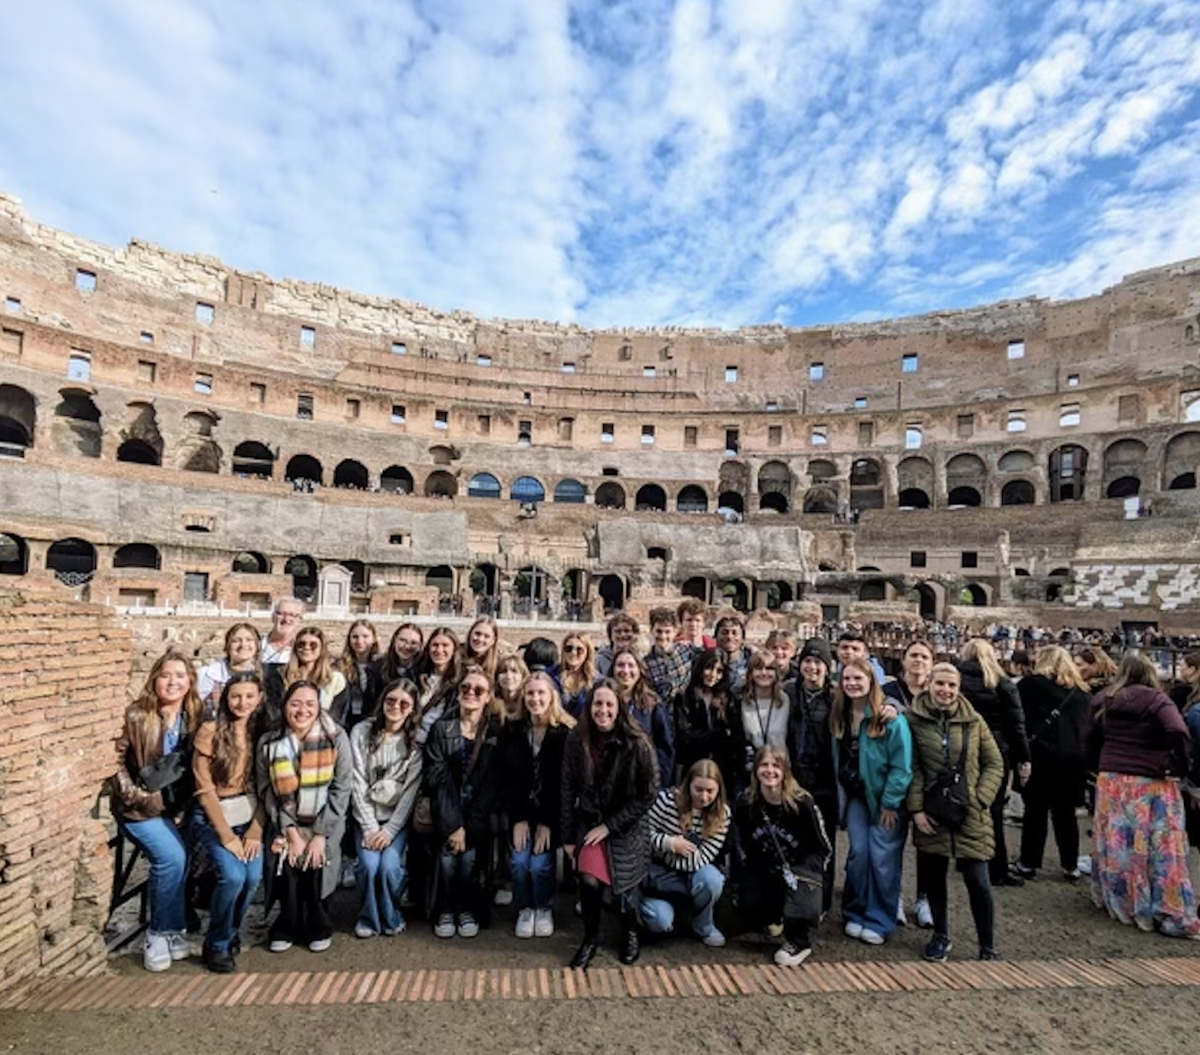 Italy+Intersession+Trip+attendees+visited+Colosseum%2C+a+famous+amphitheater+located+in+Rome.